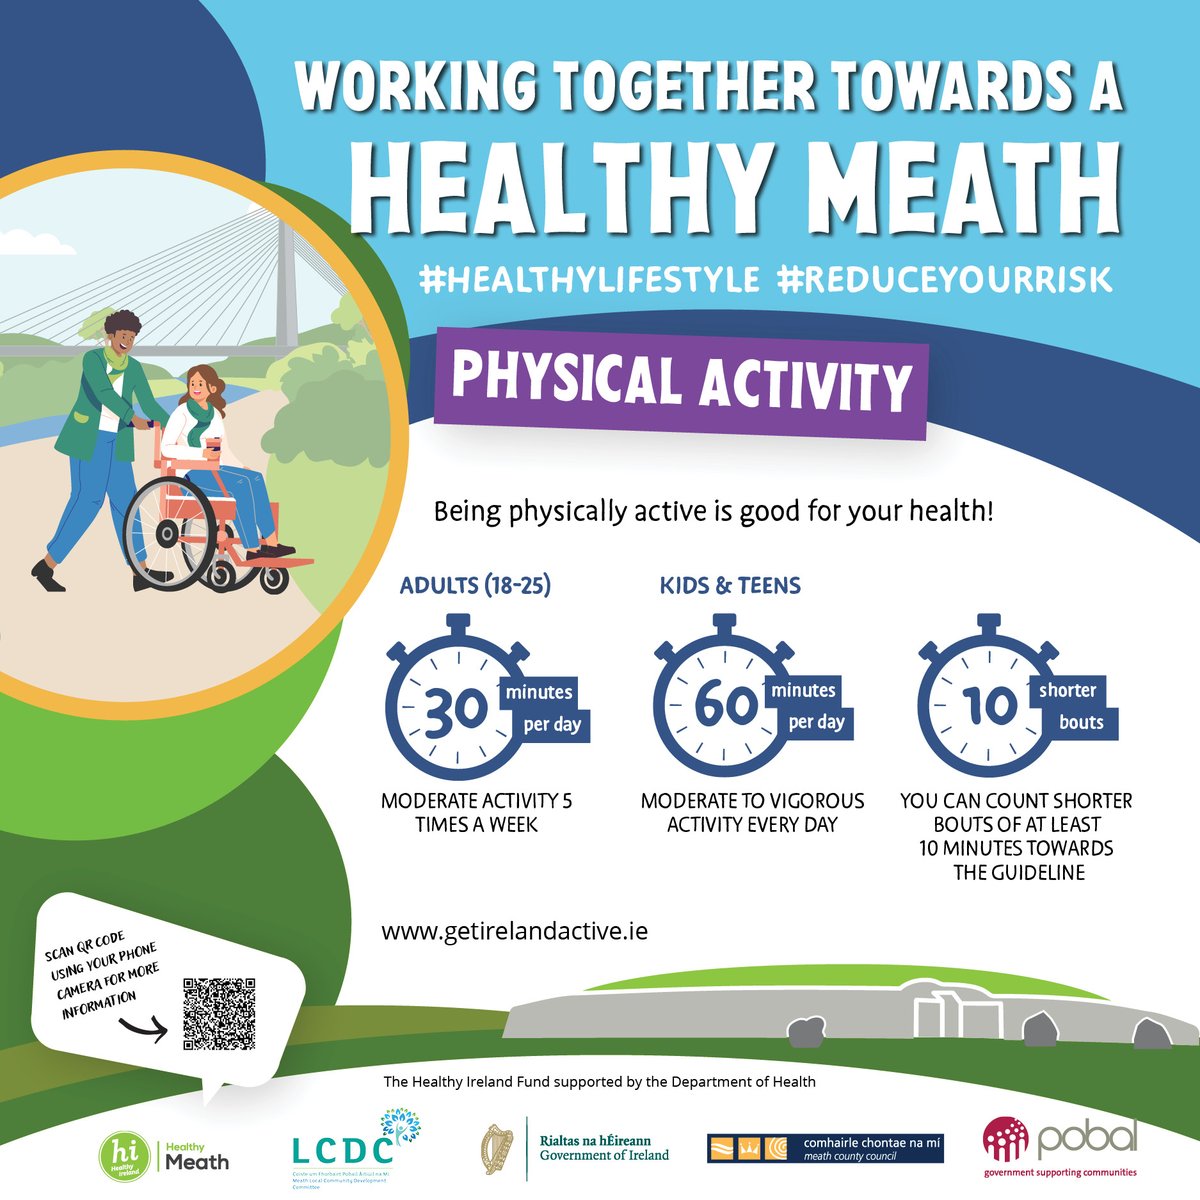 Being physically active for as little as 10 minutes a day can improve your physical and mental health. Aim for 30 minutes a day, 5 days a week!

For more info contact healthymeath@meathcoco.ie or visit bitly.ws/35Q3d

#HealthyMeath #HealthyLifestyle #ReduceYourRisk